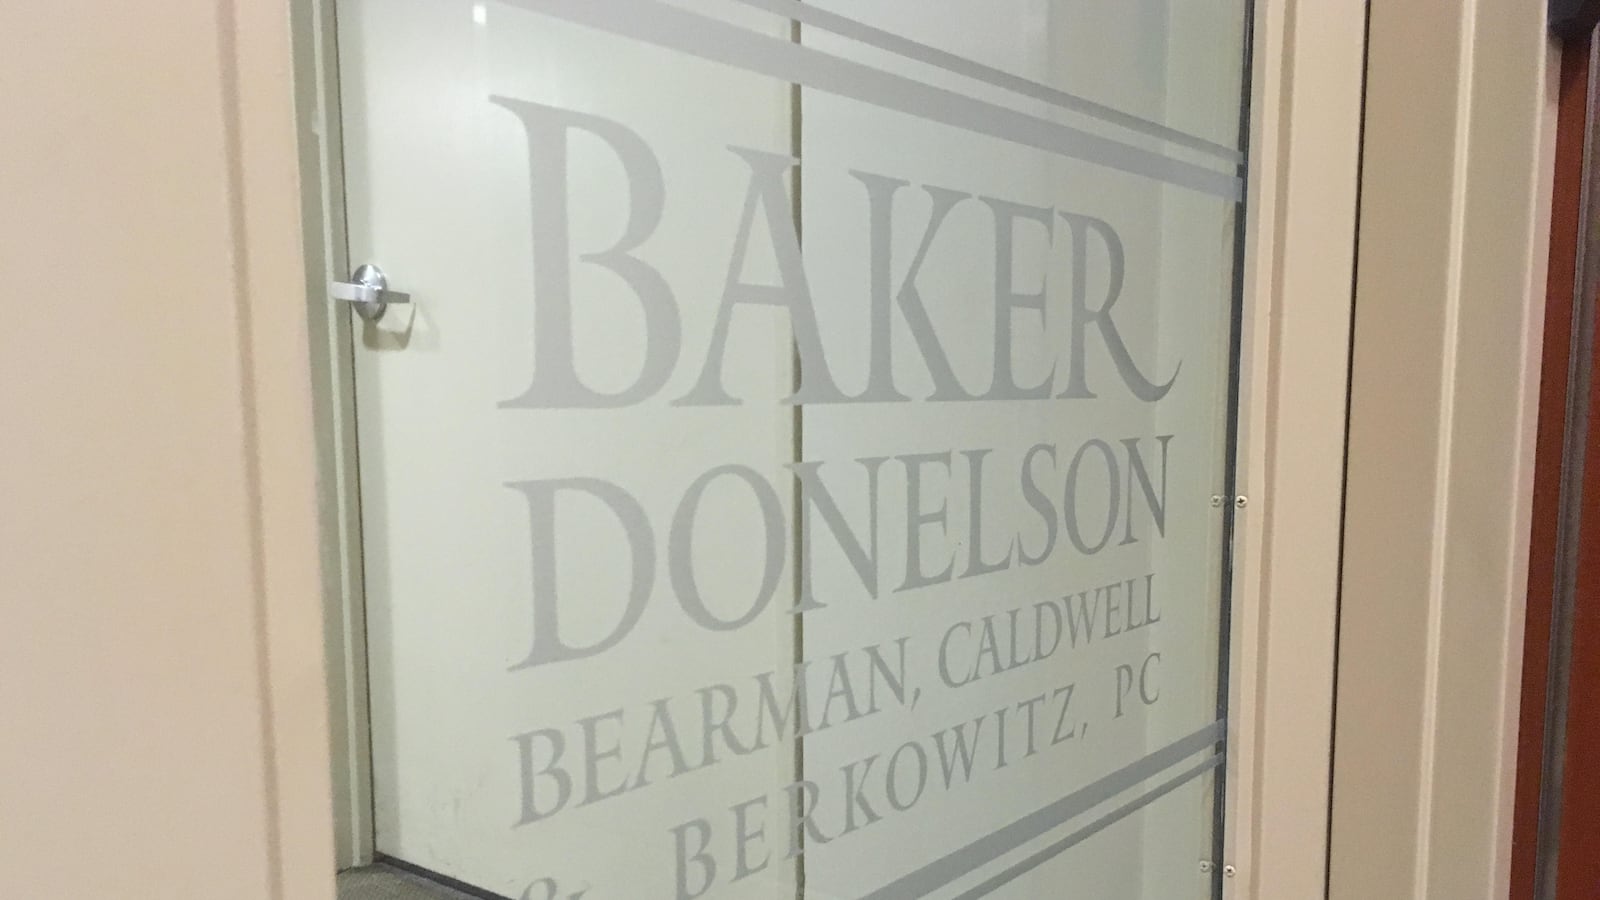 Baker Donelson law firm